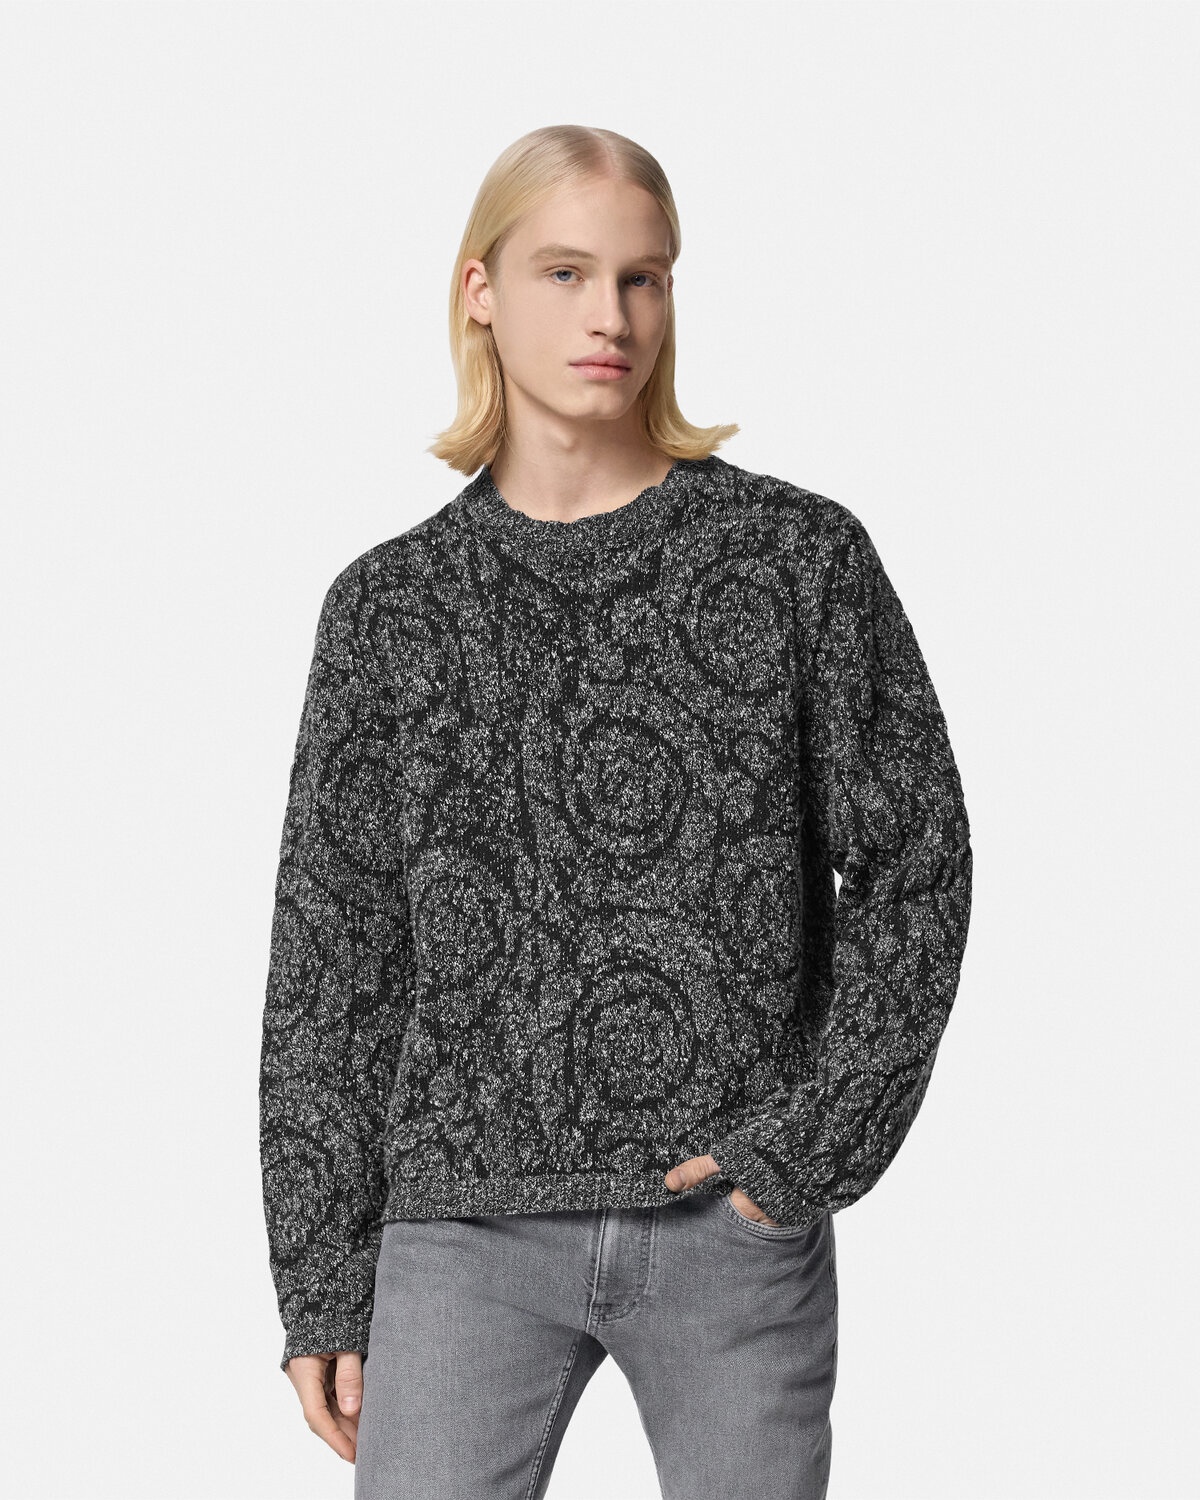 Barocco Cable-Knit Sweater - 4